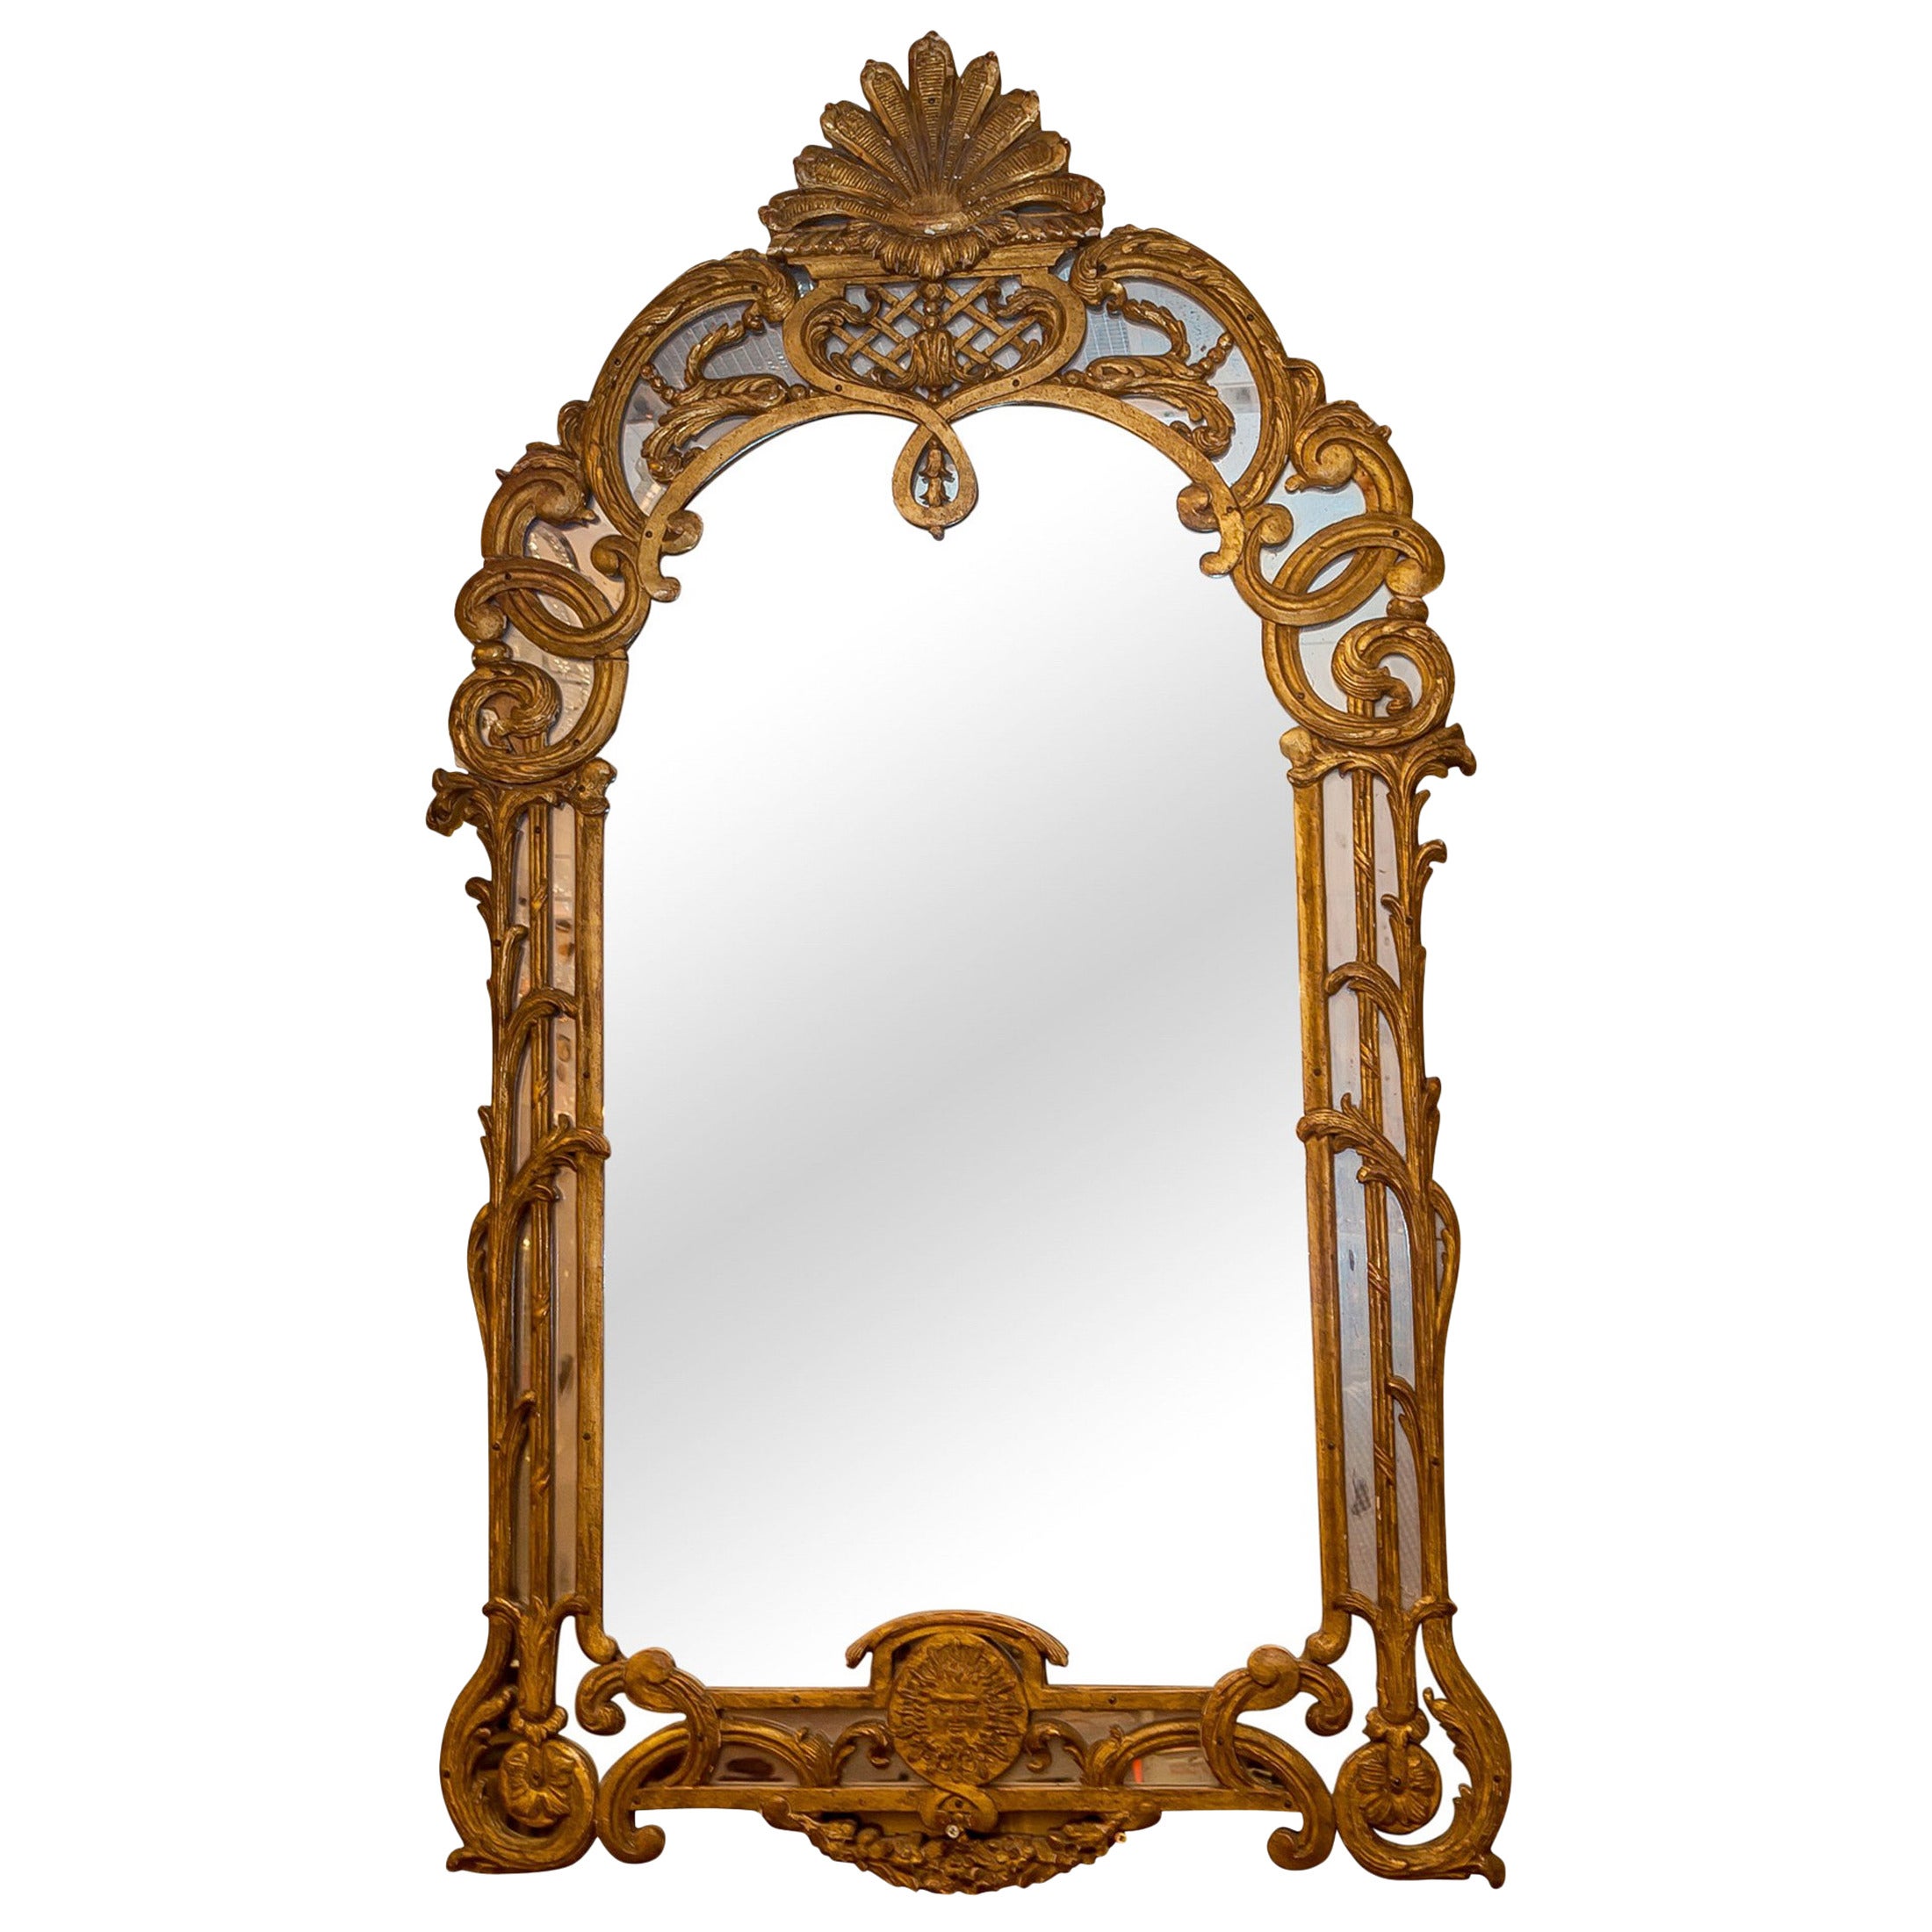 Exquisite Giltwood and Gesso Carved Venetian Mirror with Masked Sunburst